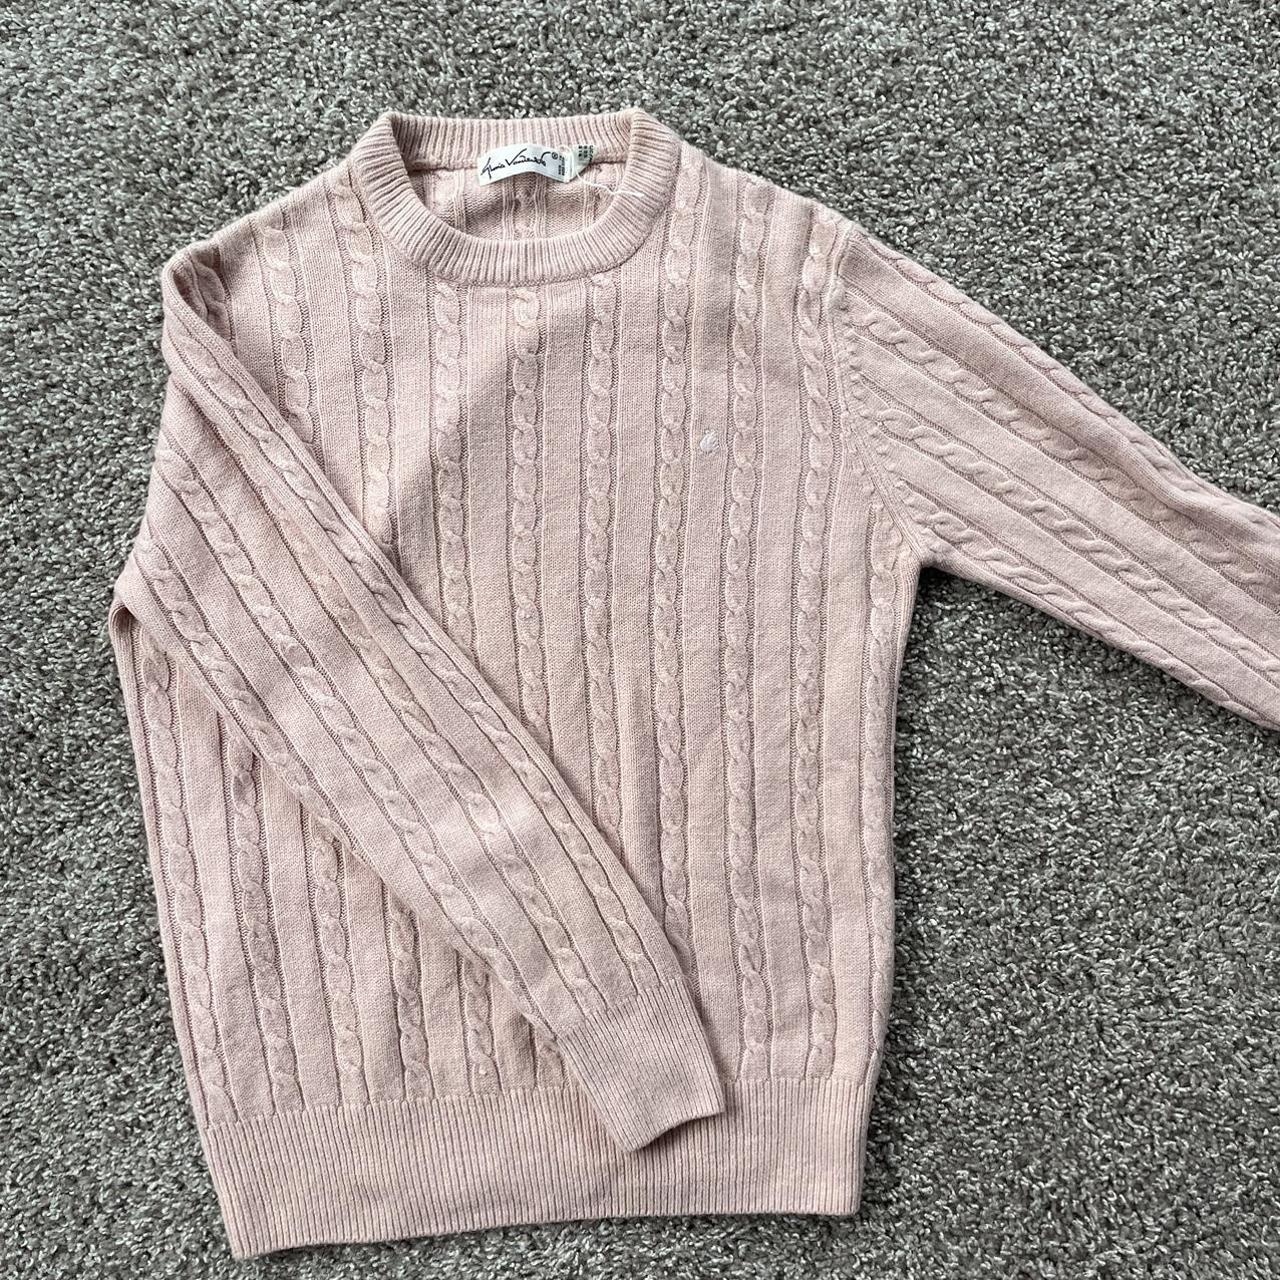 vintage cable knit sweater tagged size large but... - Depop